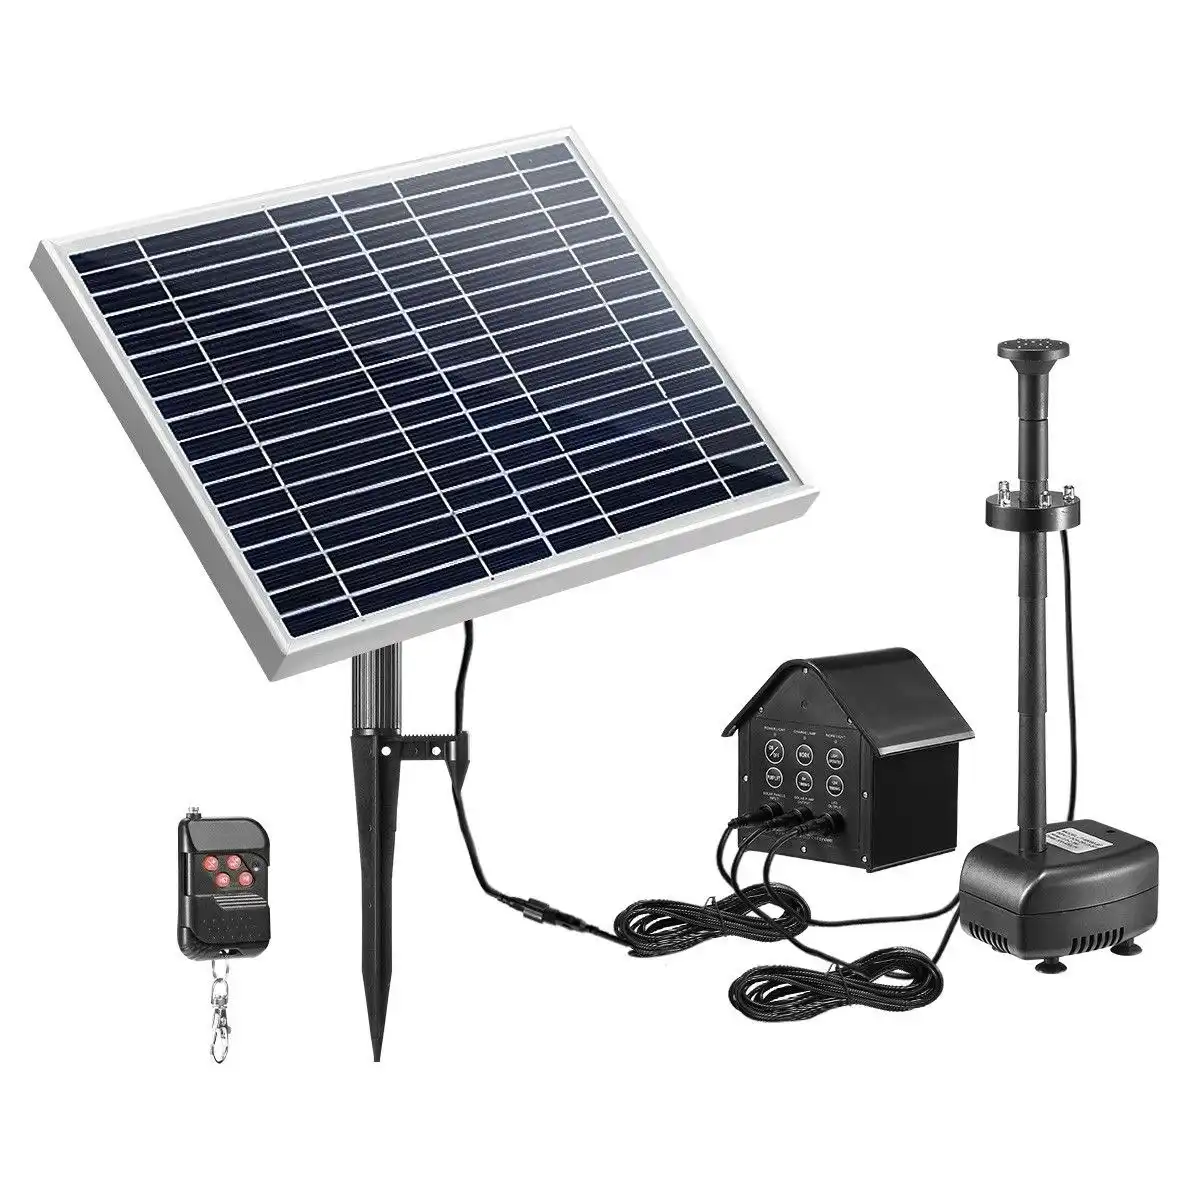 Ausway 50W Solar Fountain Water Pump with Battery and LED Light for Birdbath Garden Pool